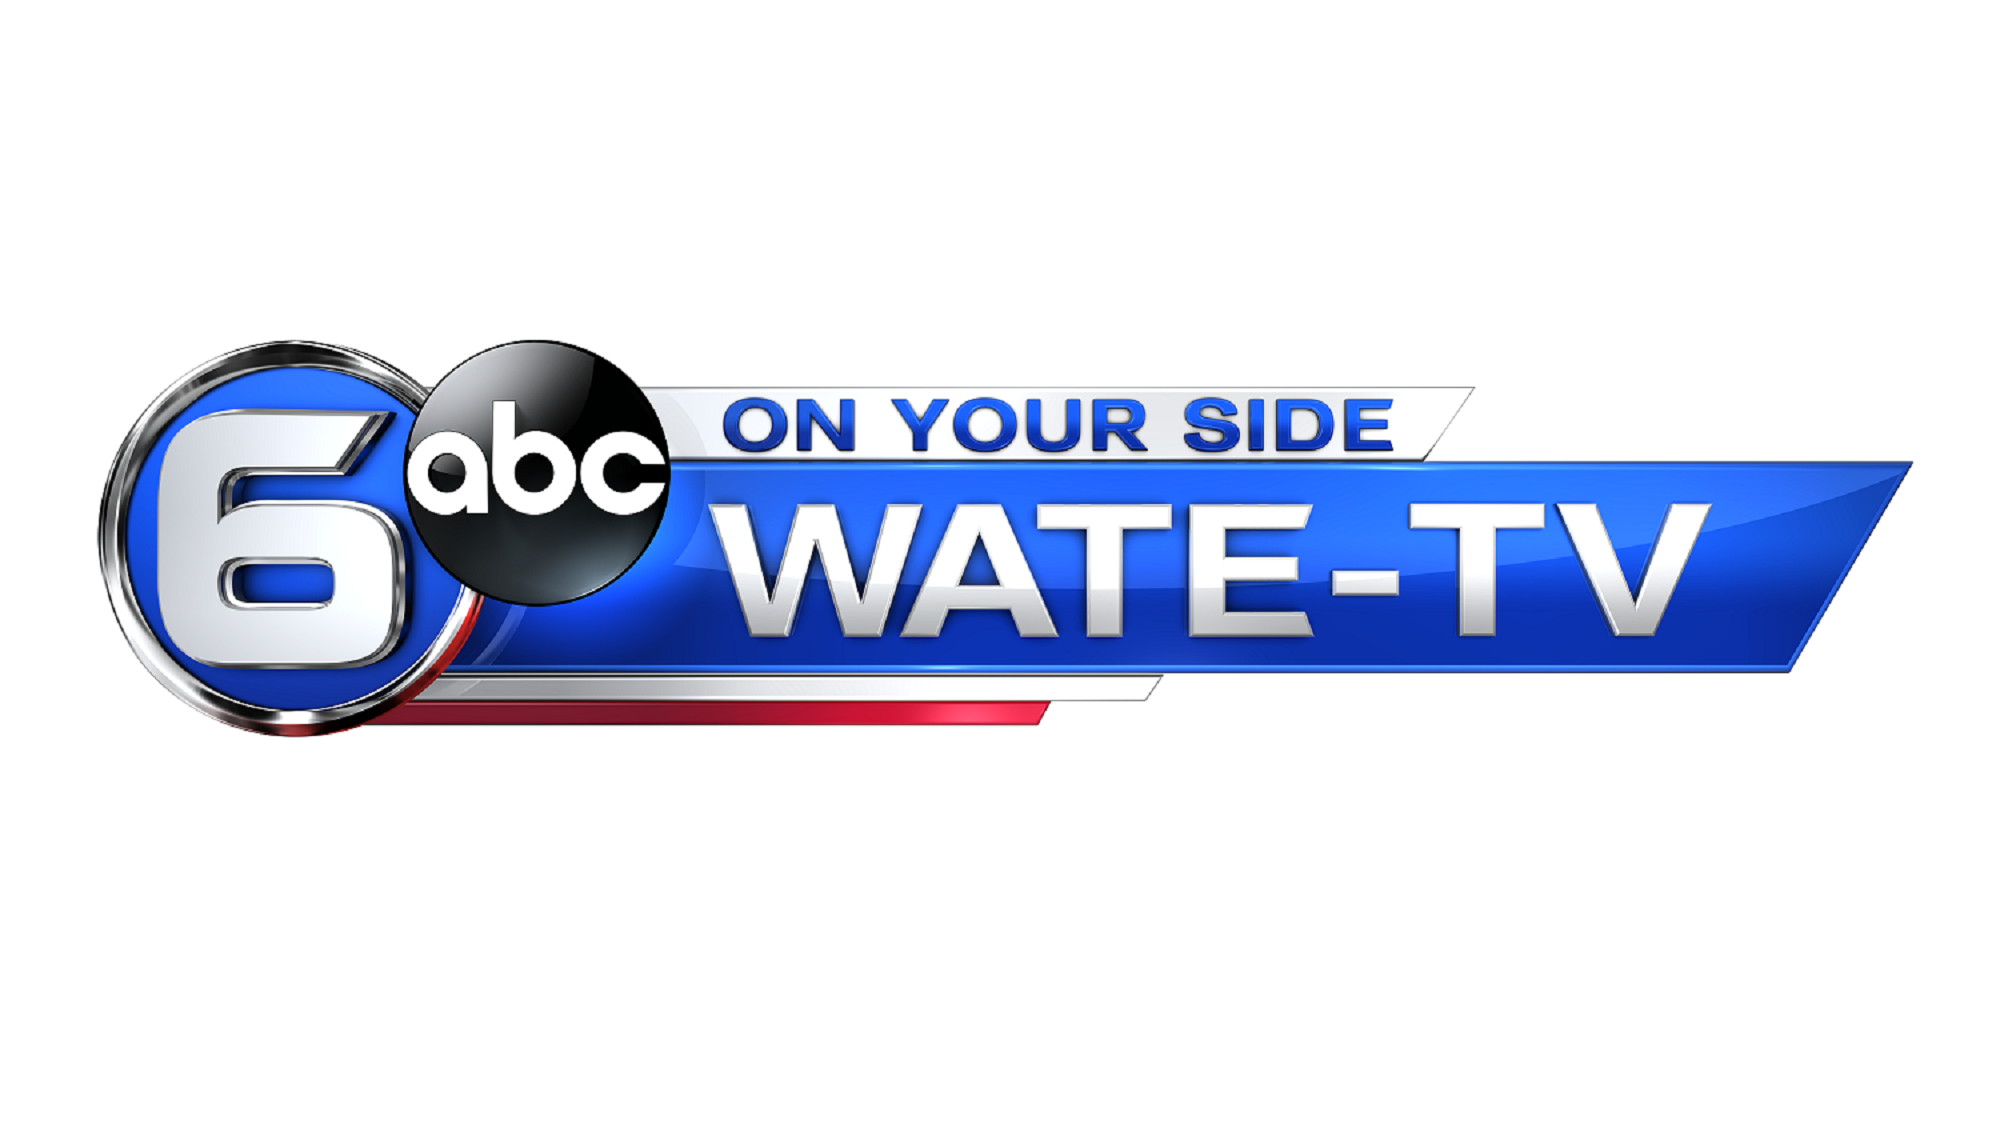 WATE-TV Channel 6 (Presenting)